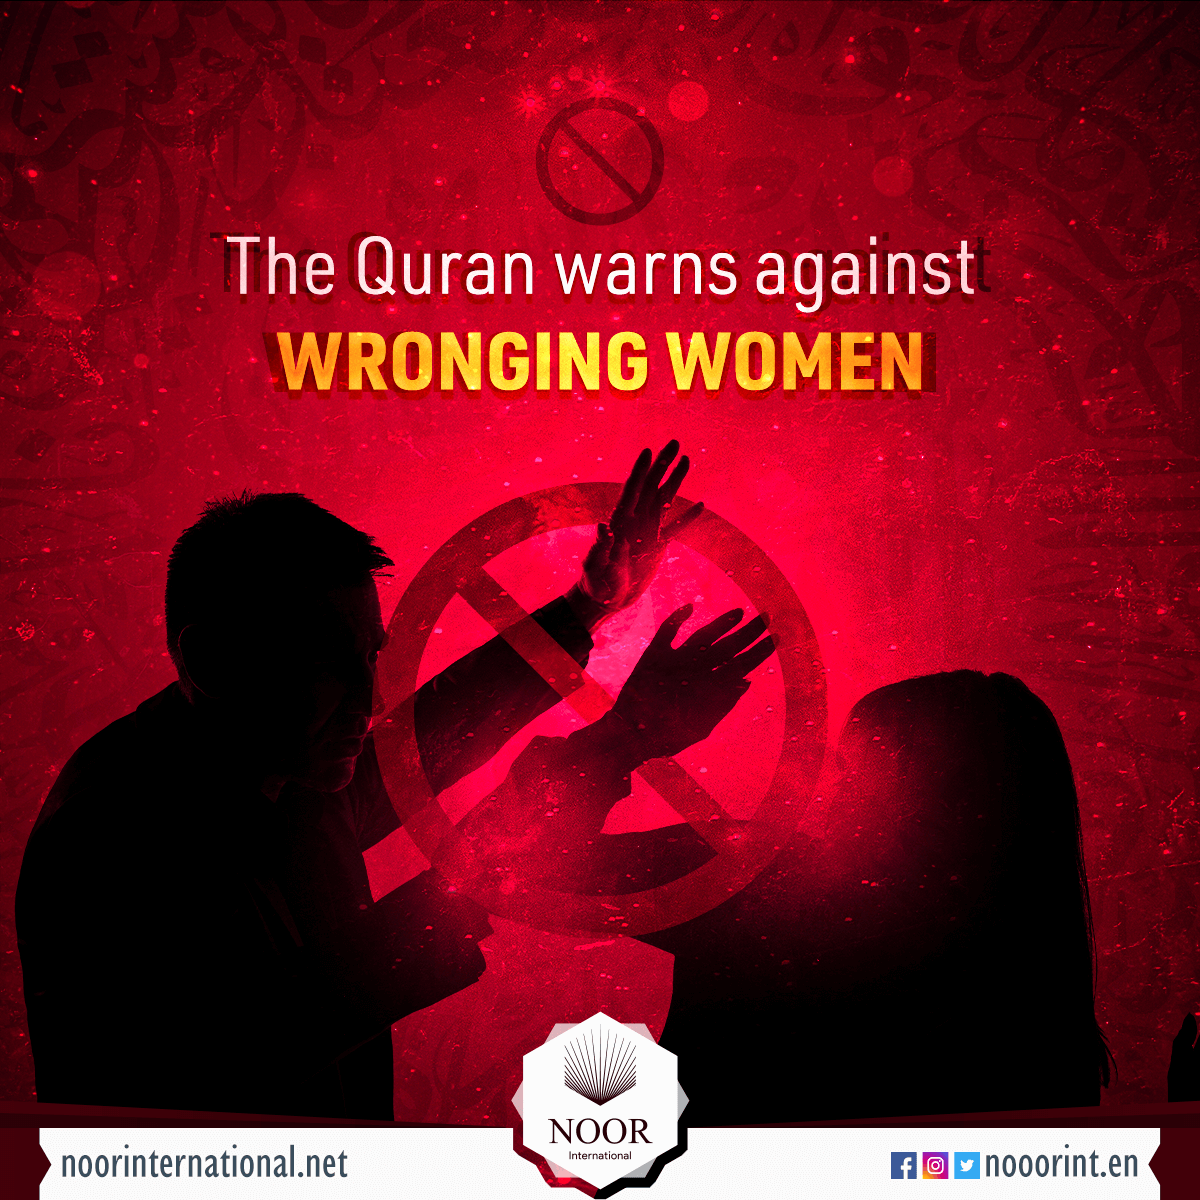 The Quran warns against wronging women